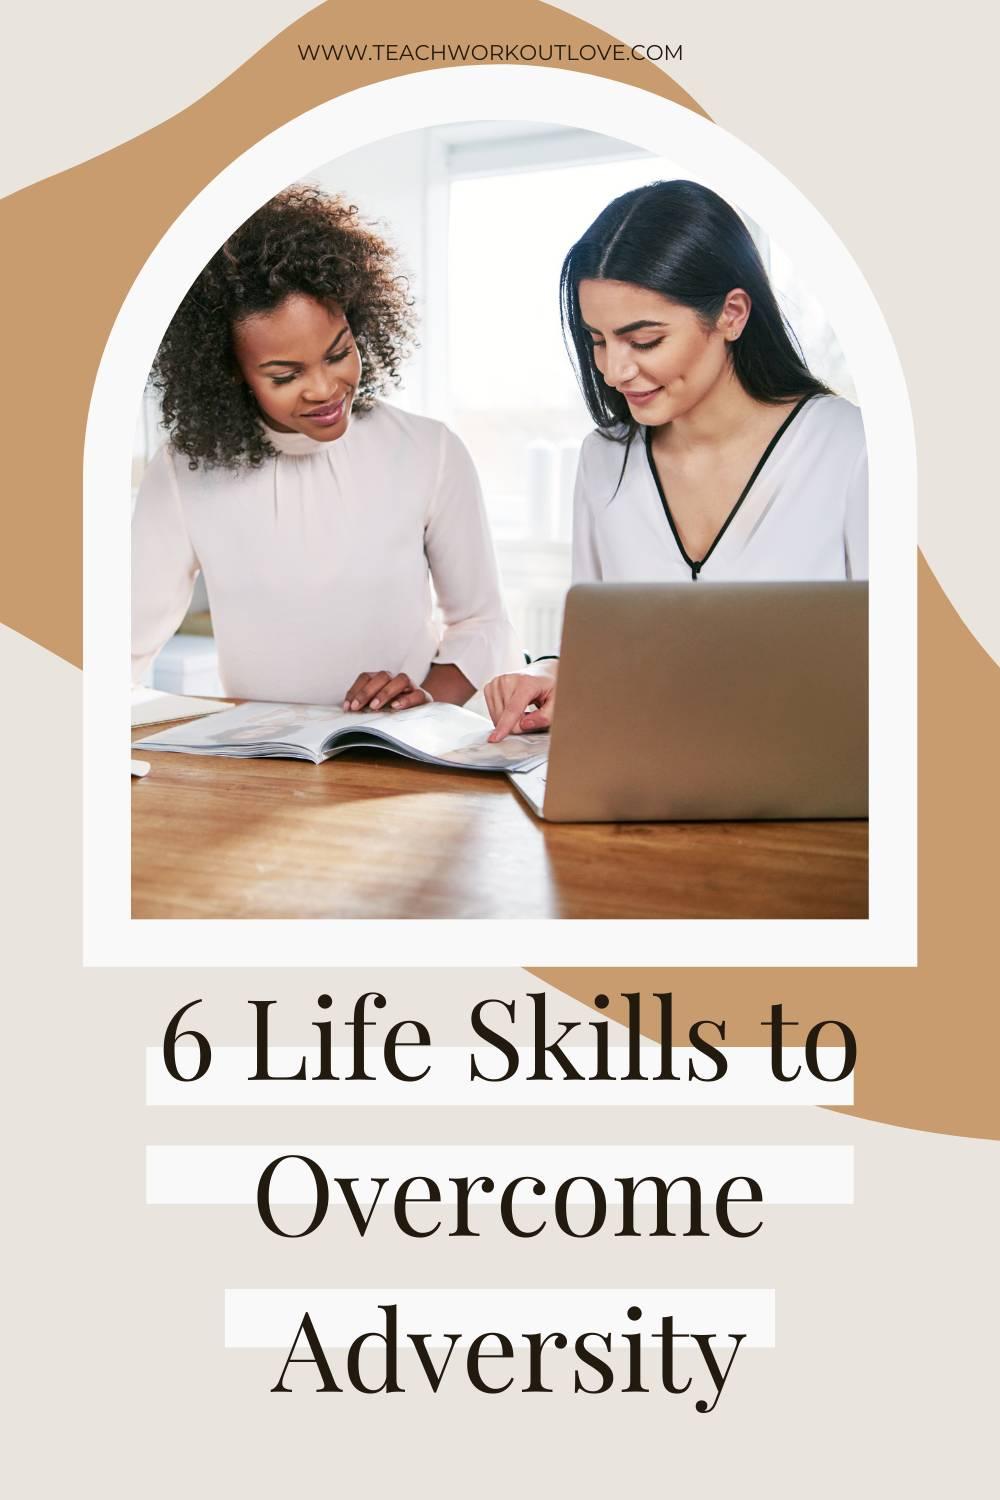 Successful people know how to tackle the odds. Click here to learn about 6 life skills that can help you overcome adversity.